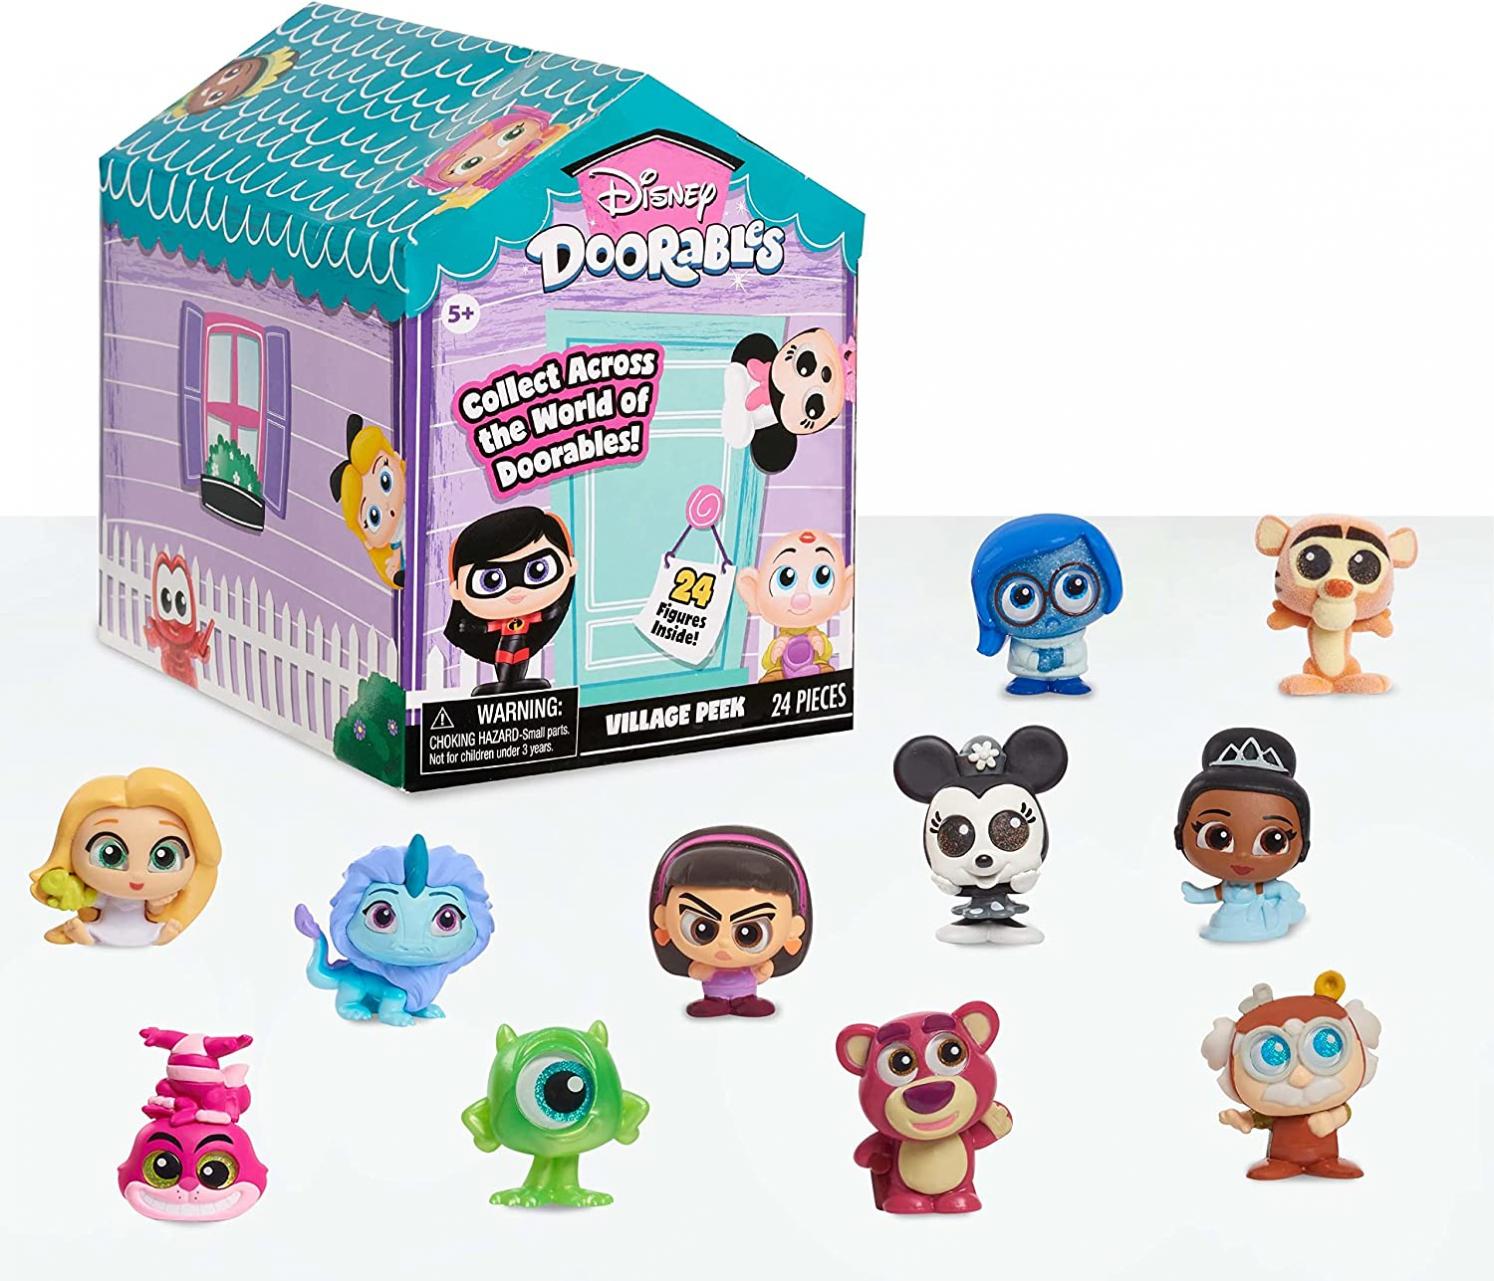 Disney Doorables Mega Village Peek Pack, Series 6, 7, and 8, Toy Figures, Officially Licensed Kids Toys for Ages 5 Up, Gifts and Presents, Amazon Exclusive